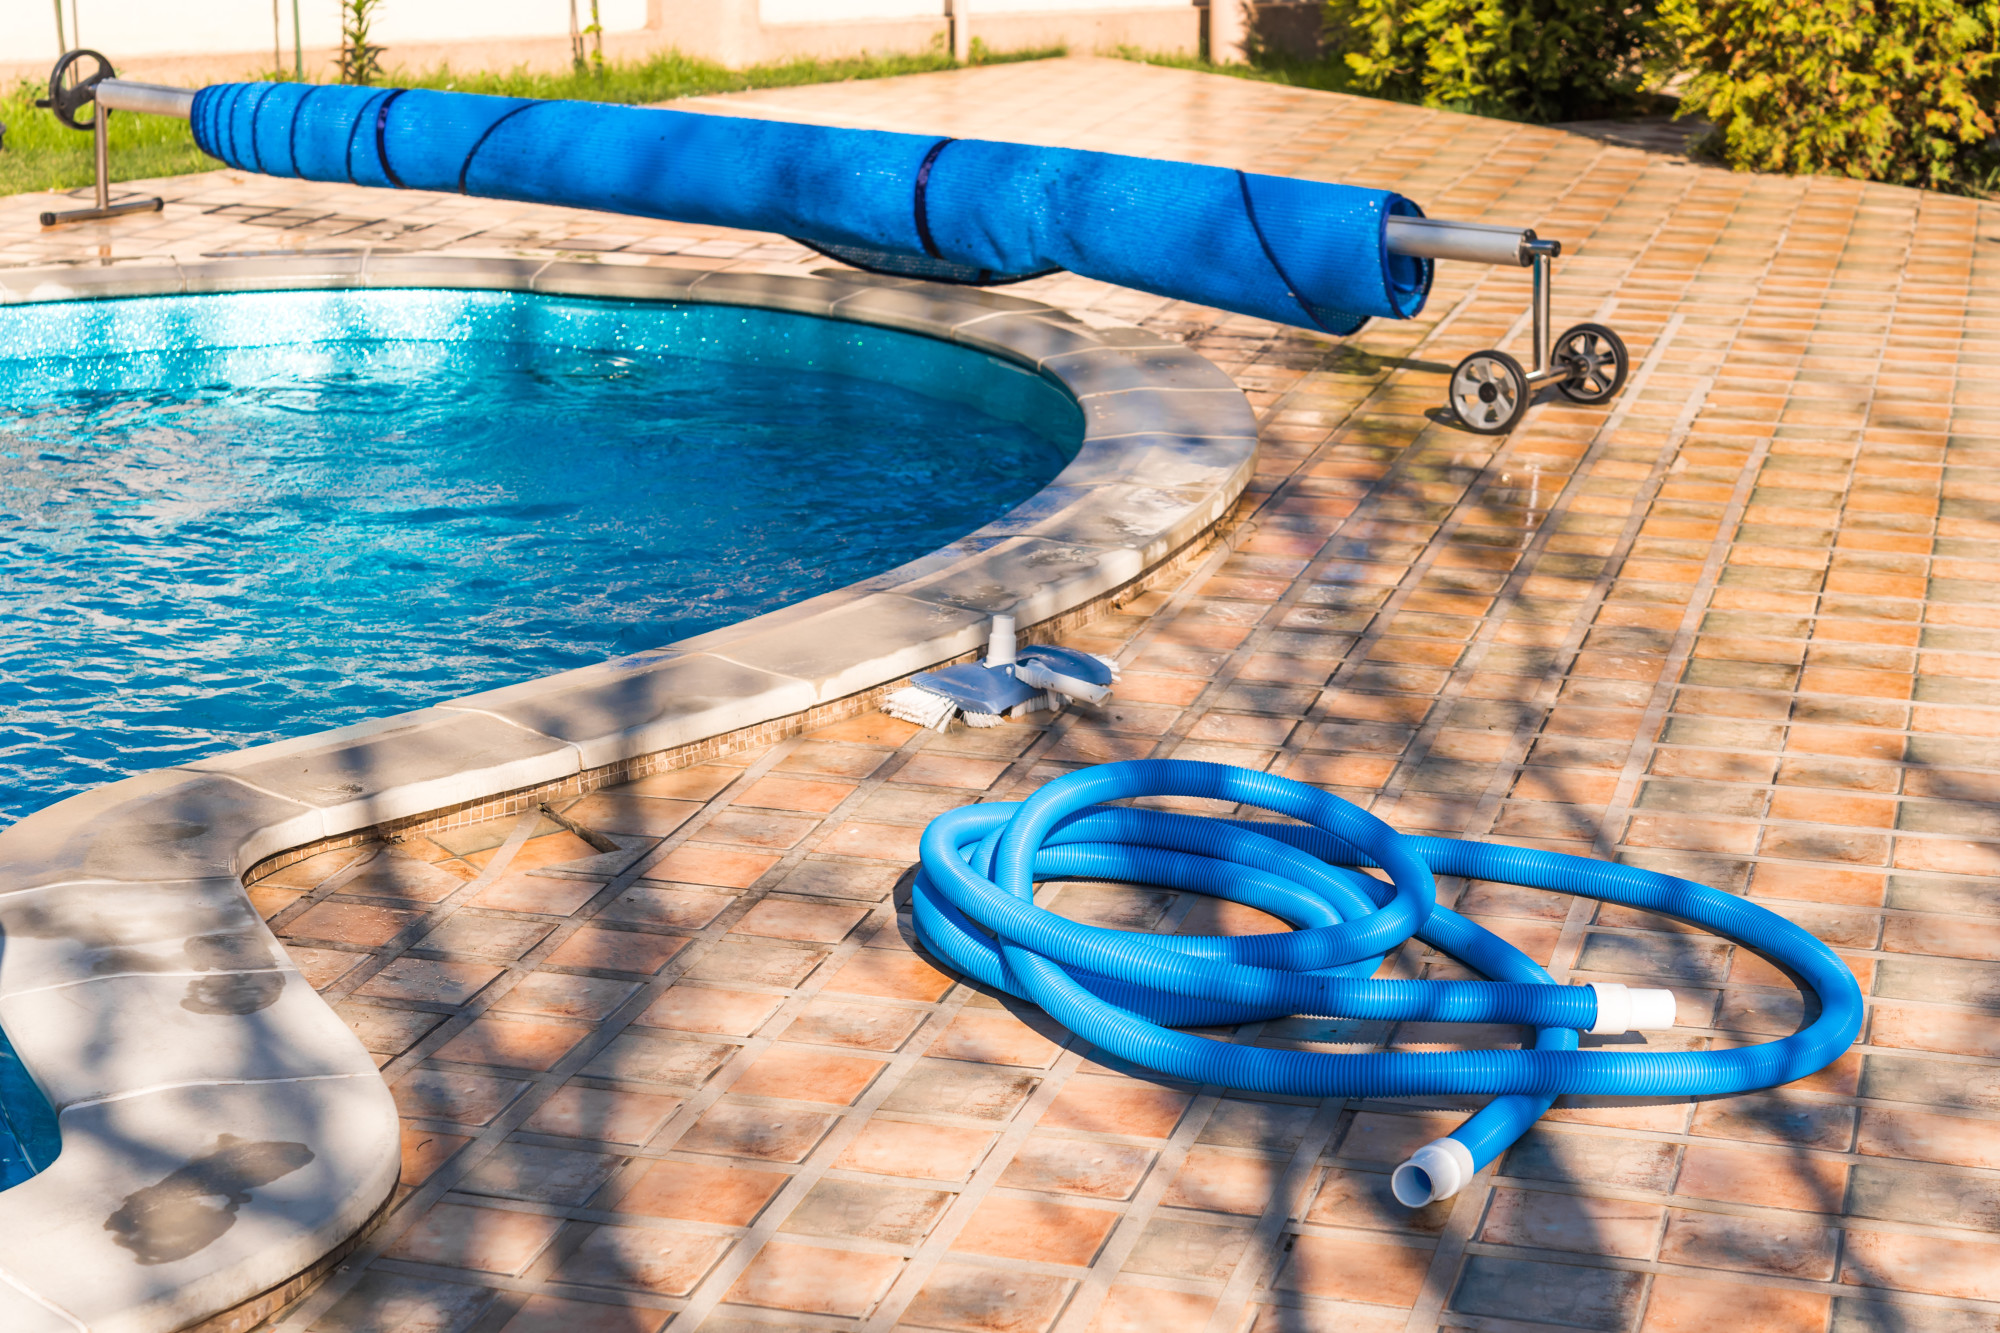 Are you looking for the perfect pool cover for your yard? Click here for seven simple tips for choosing the right pool cover for your pool.